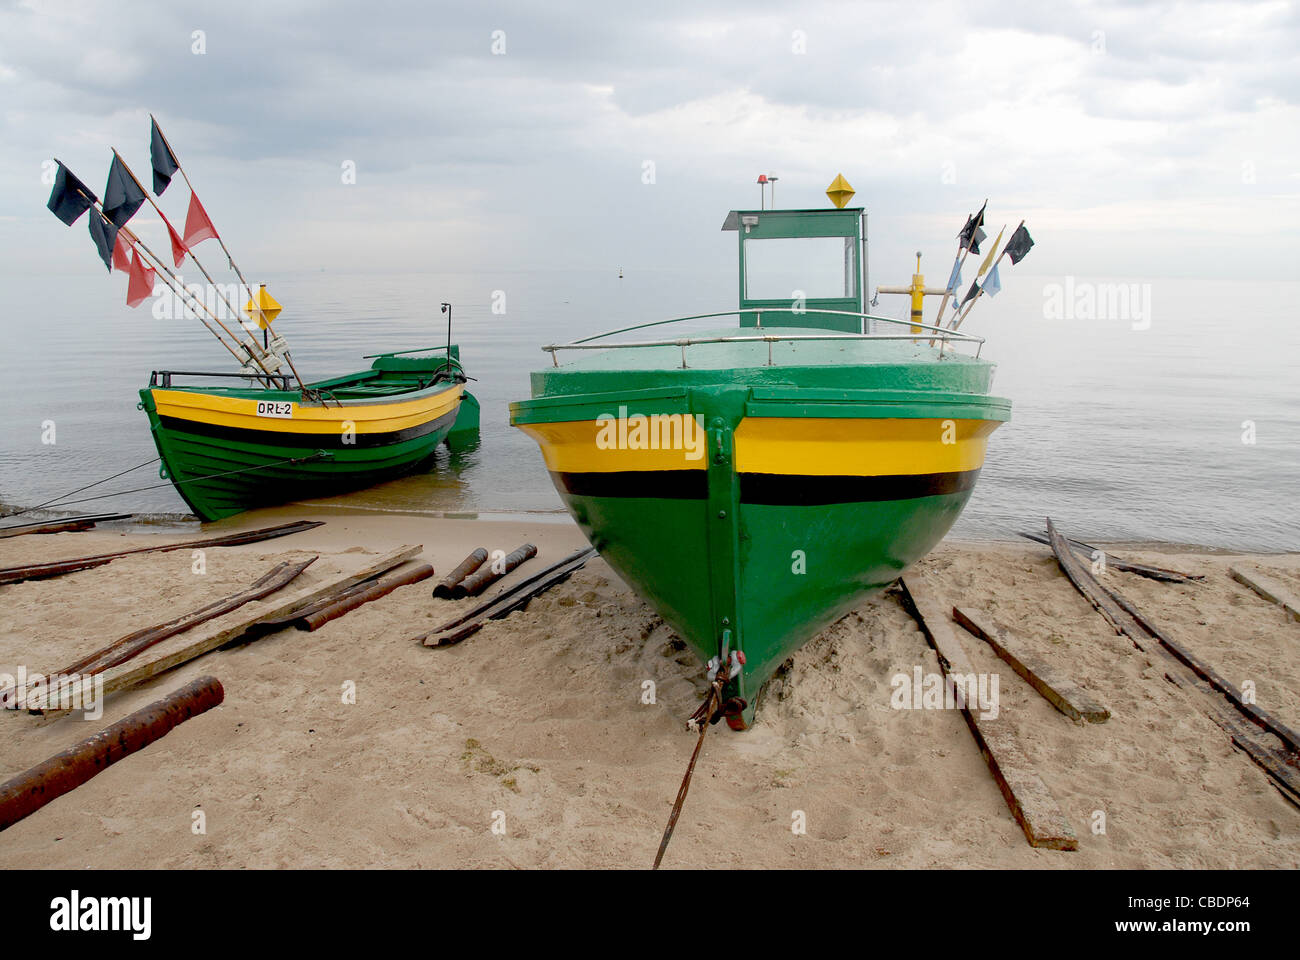 Yellow and green fishing boats on the shore of Orlowo, a district of Gdingen, Gdynia, on the Baltic Sea of Pomerania, Poland Stock Photo